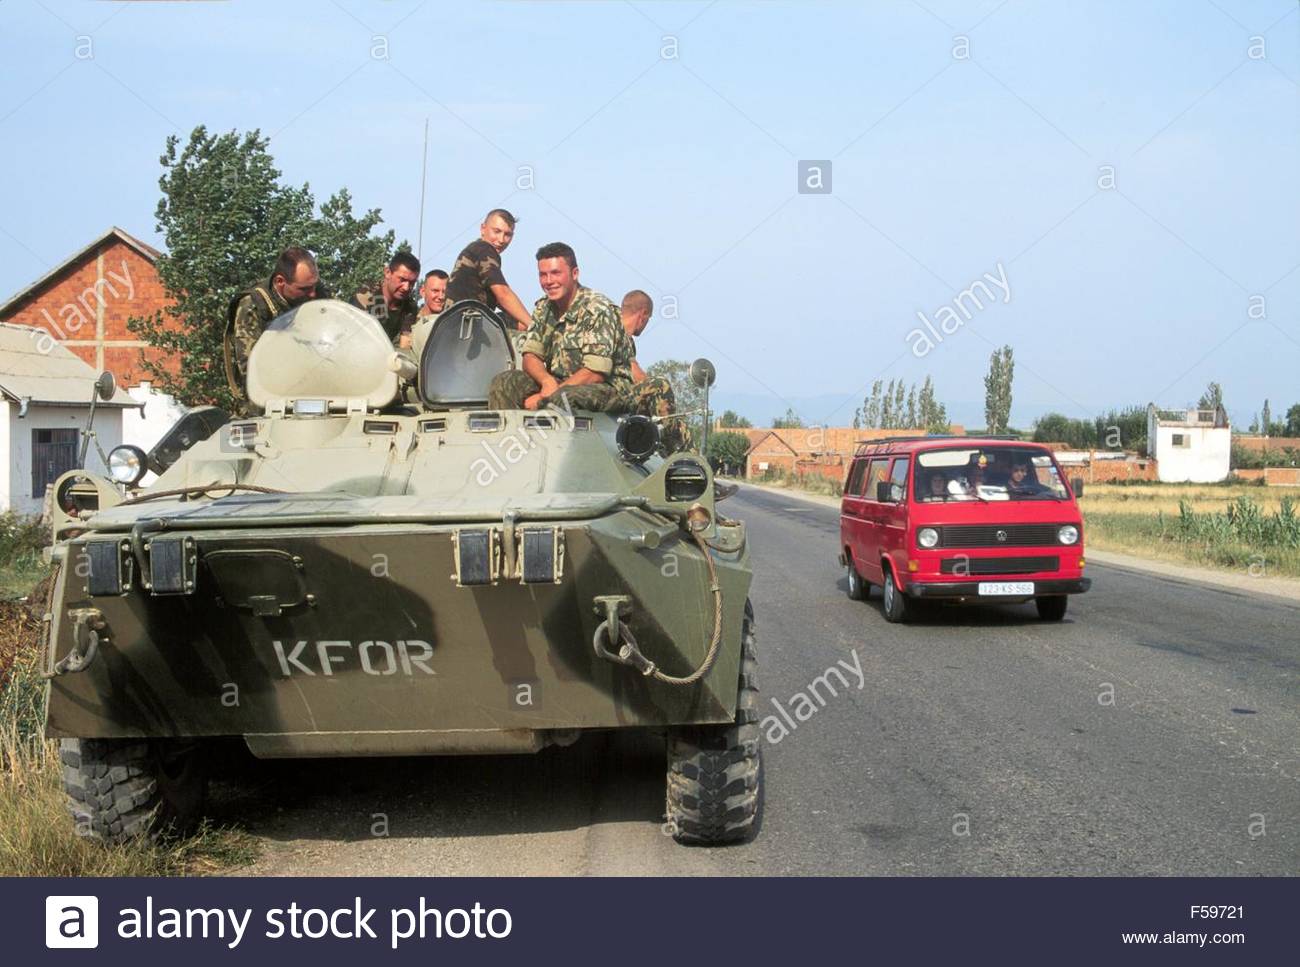 Kosovo, July 2000, checkpoint of Russian soldiers near Pristina airport.jpg